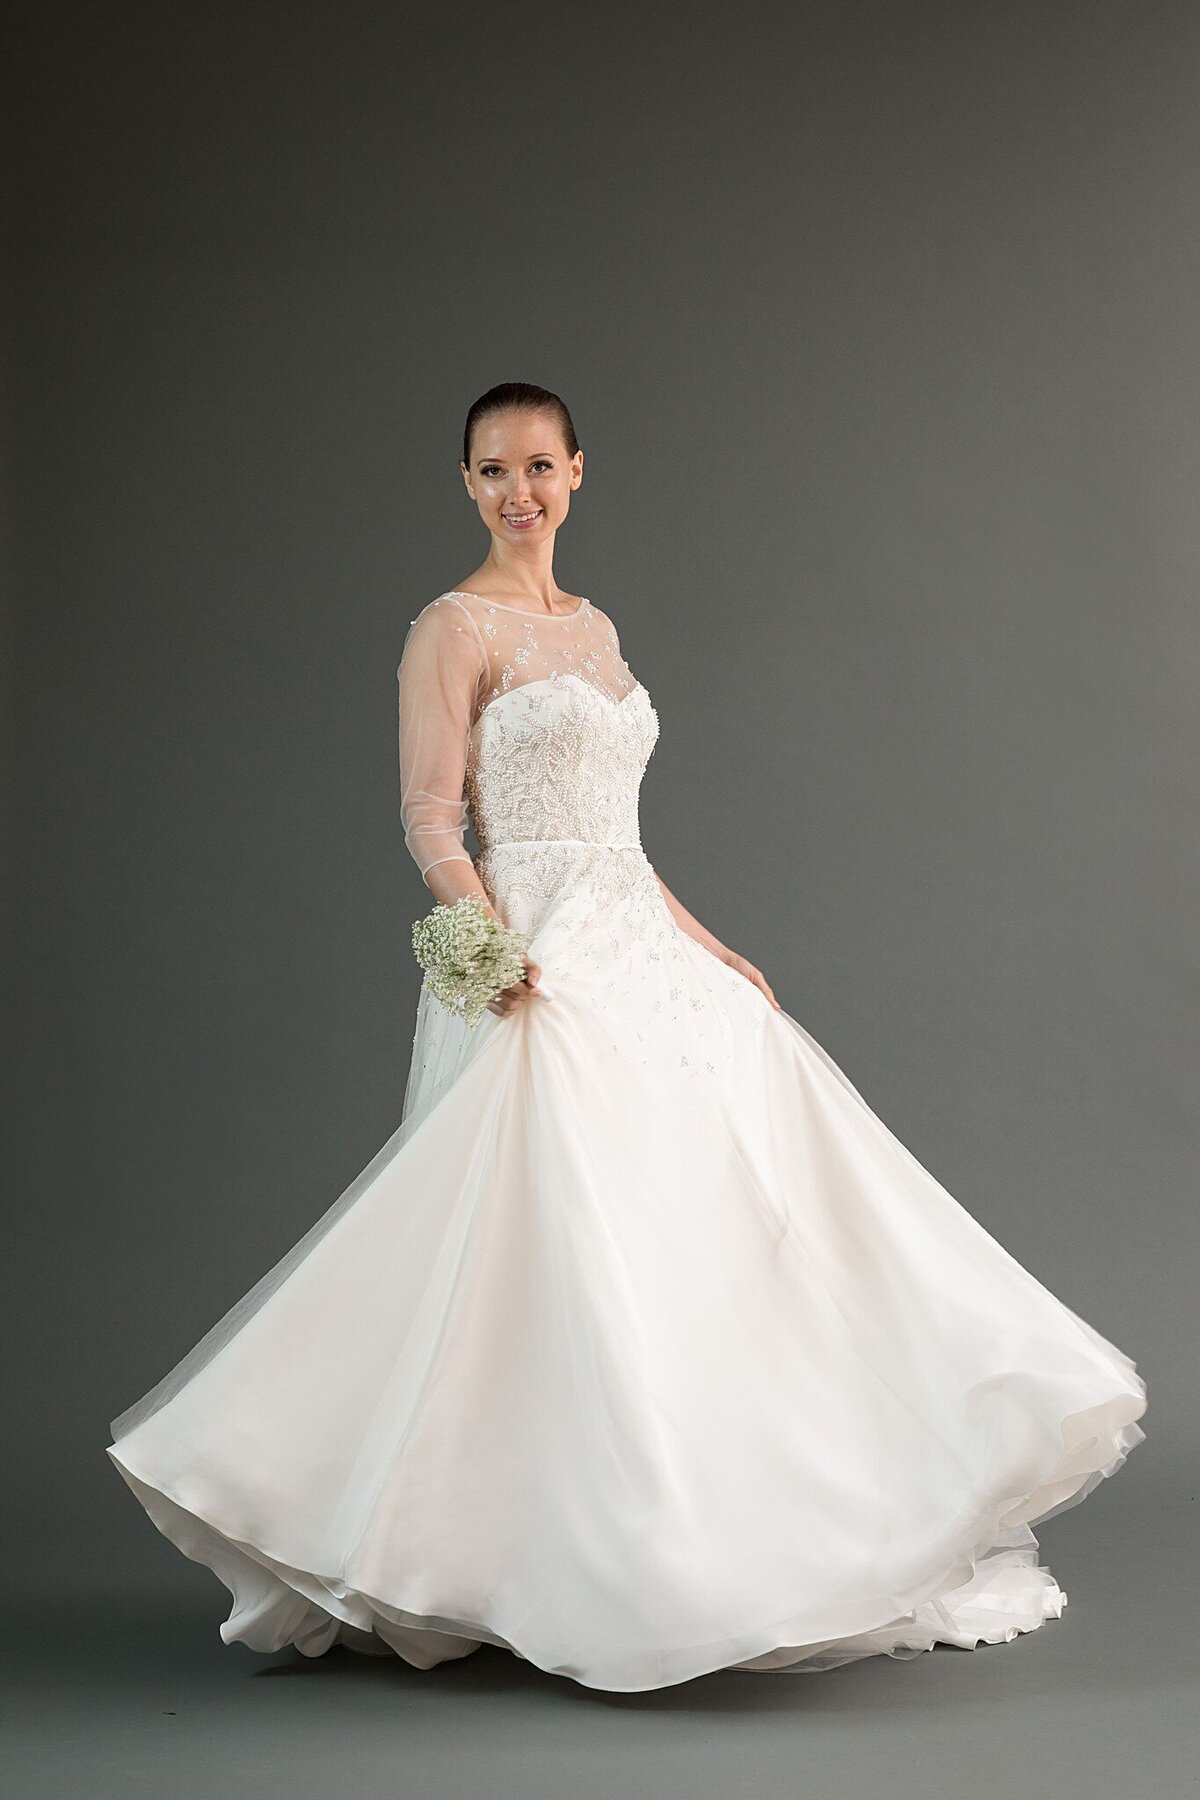 The a-line silhouette of the Rei wedding dress style twirls beautifully with its layers of skirt and pearl beaded tulle.